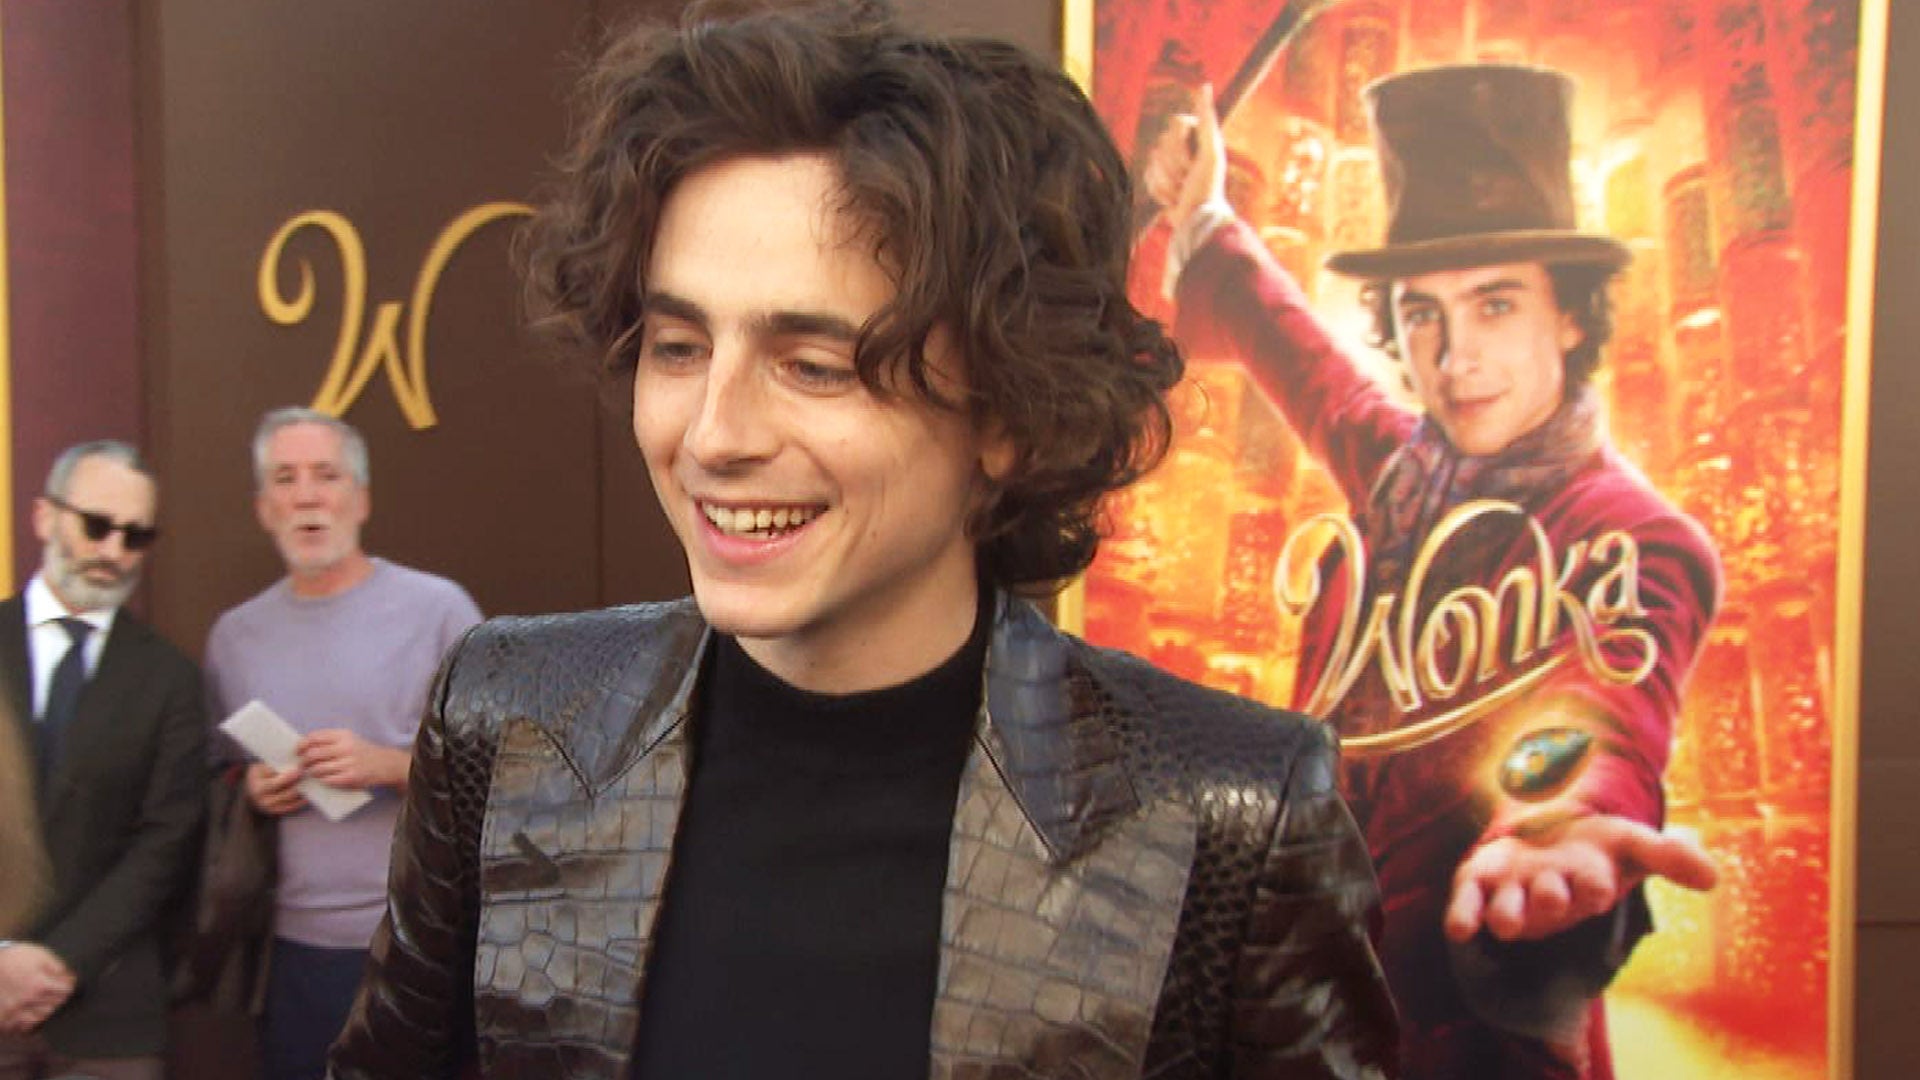 Timotheé Chalamet 'Very Grateful' to Have So Much Going On in His Life (Exclusive)